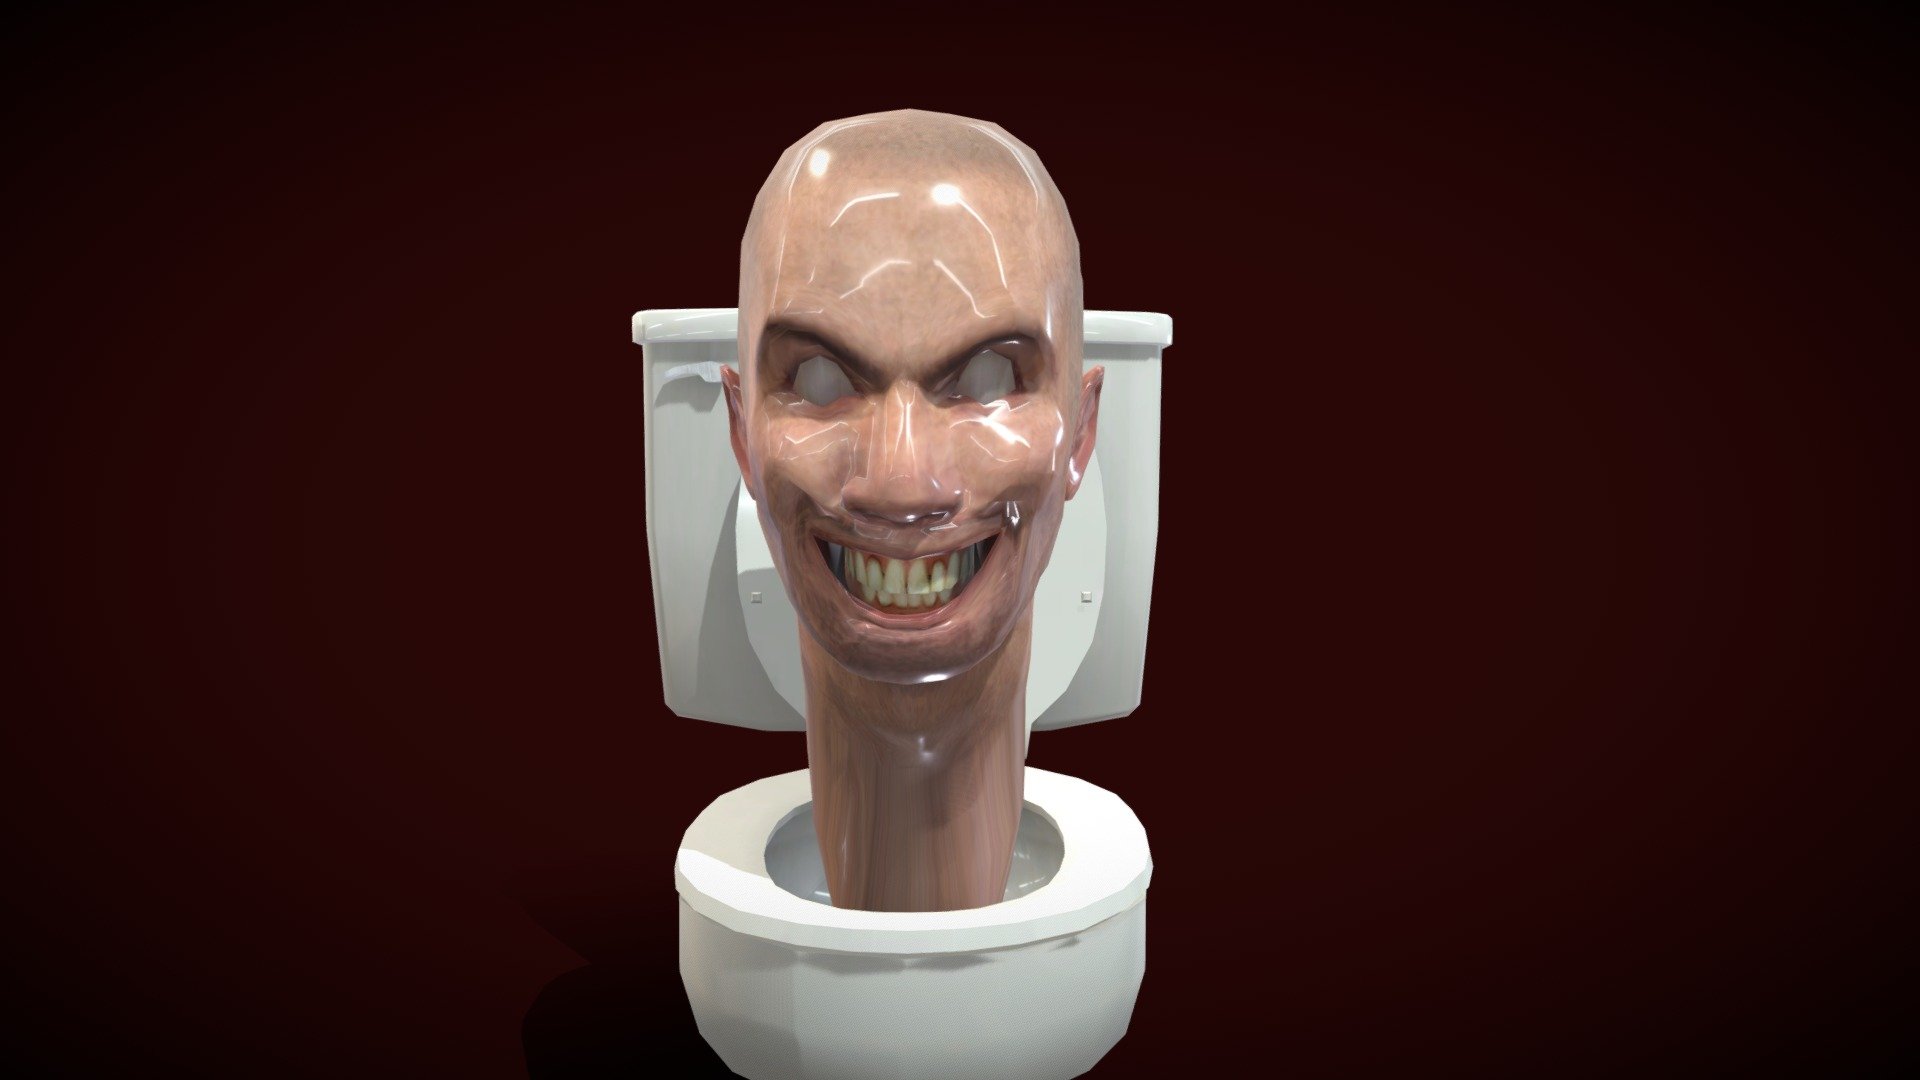 skibidi dop dop dop yes yes. Credit me you fucks. No way i will keep contacting DMCA.

Download: https://discord.gg/26tRBSUhYJ

Note: You need level 5 - Male 04 Skibidi Toilet - 3D model by BeastMan (@TitanBeastMan) 3d model